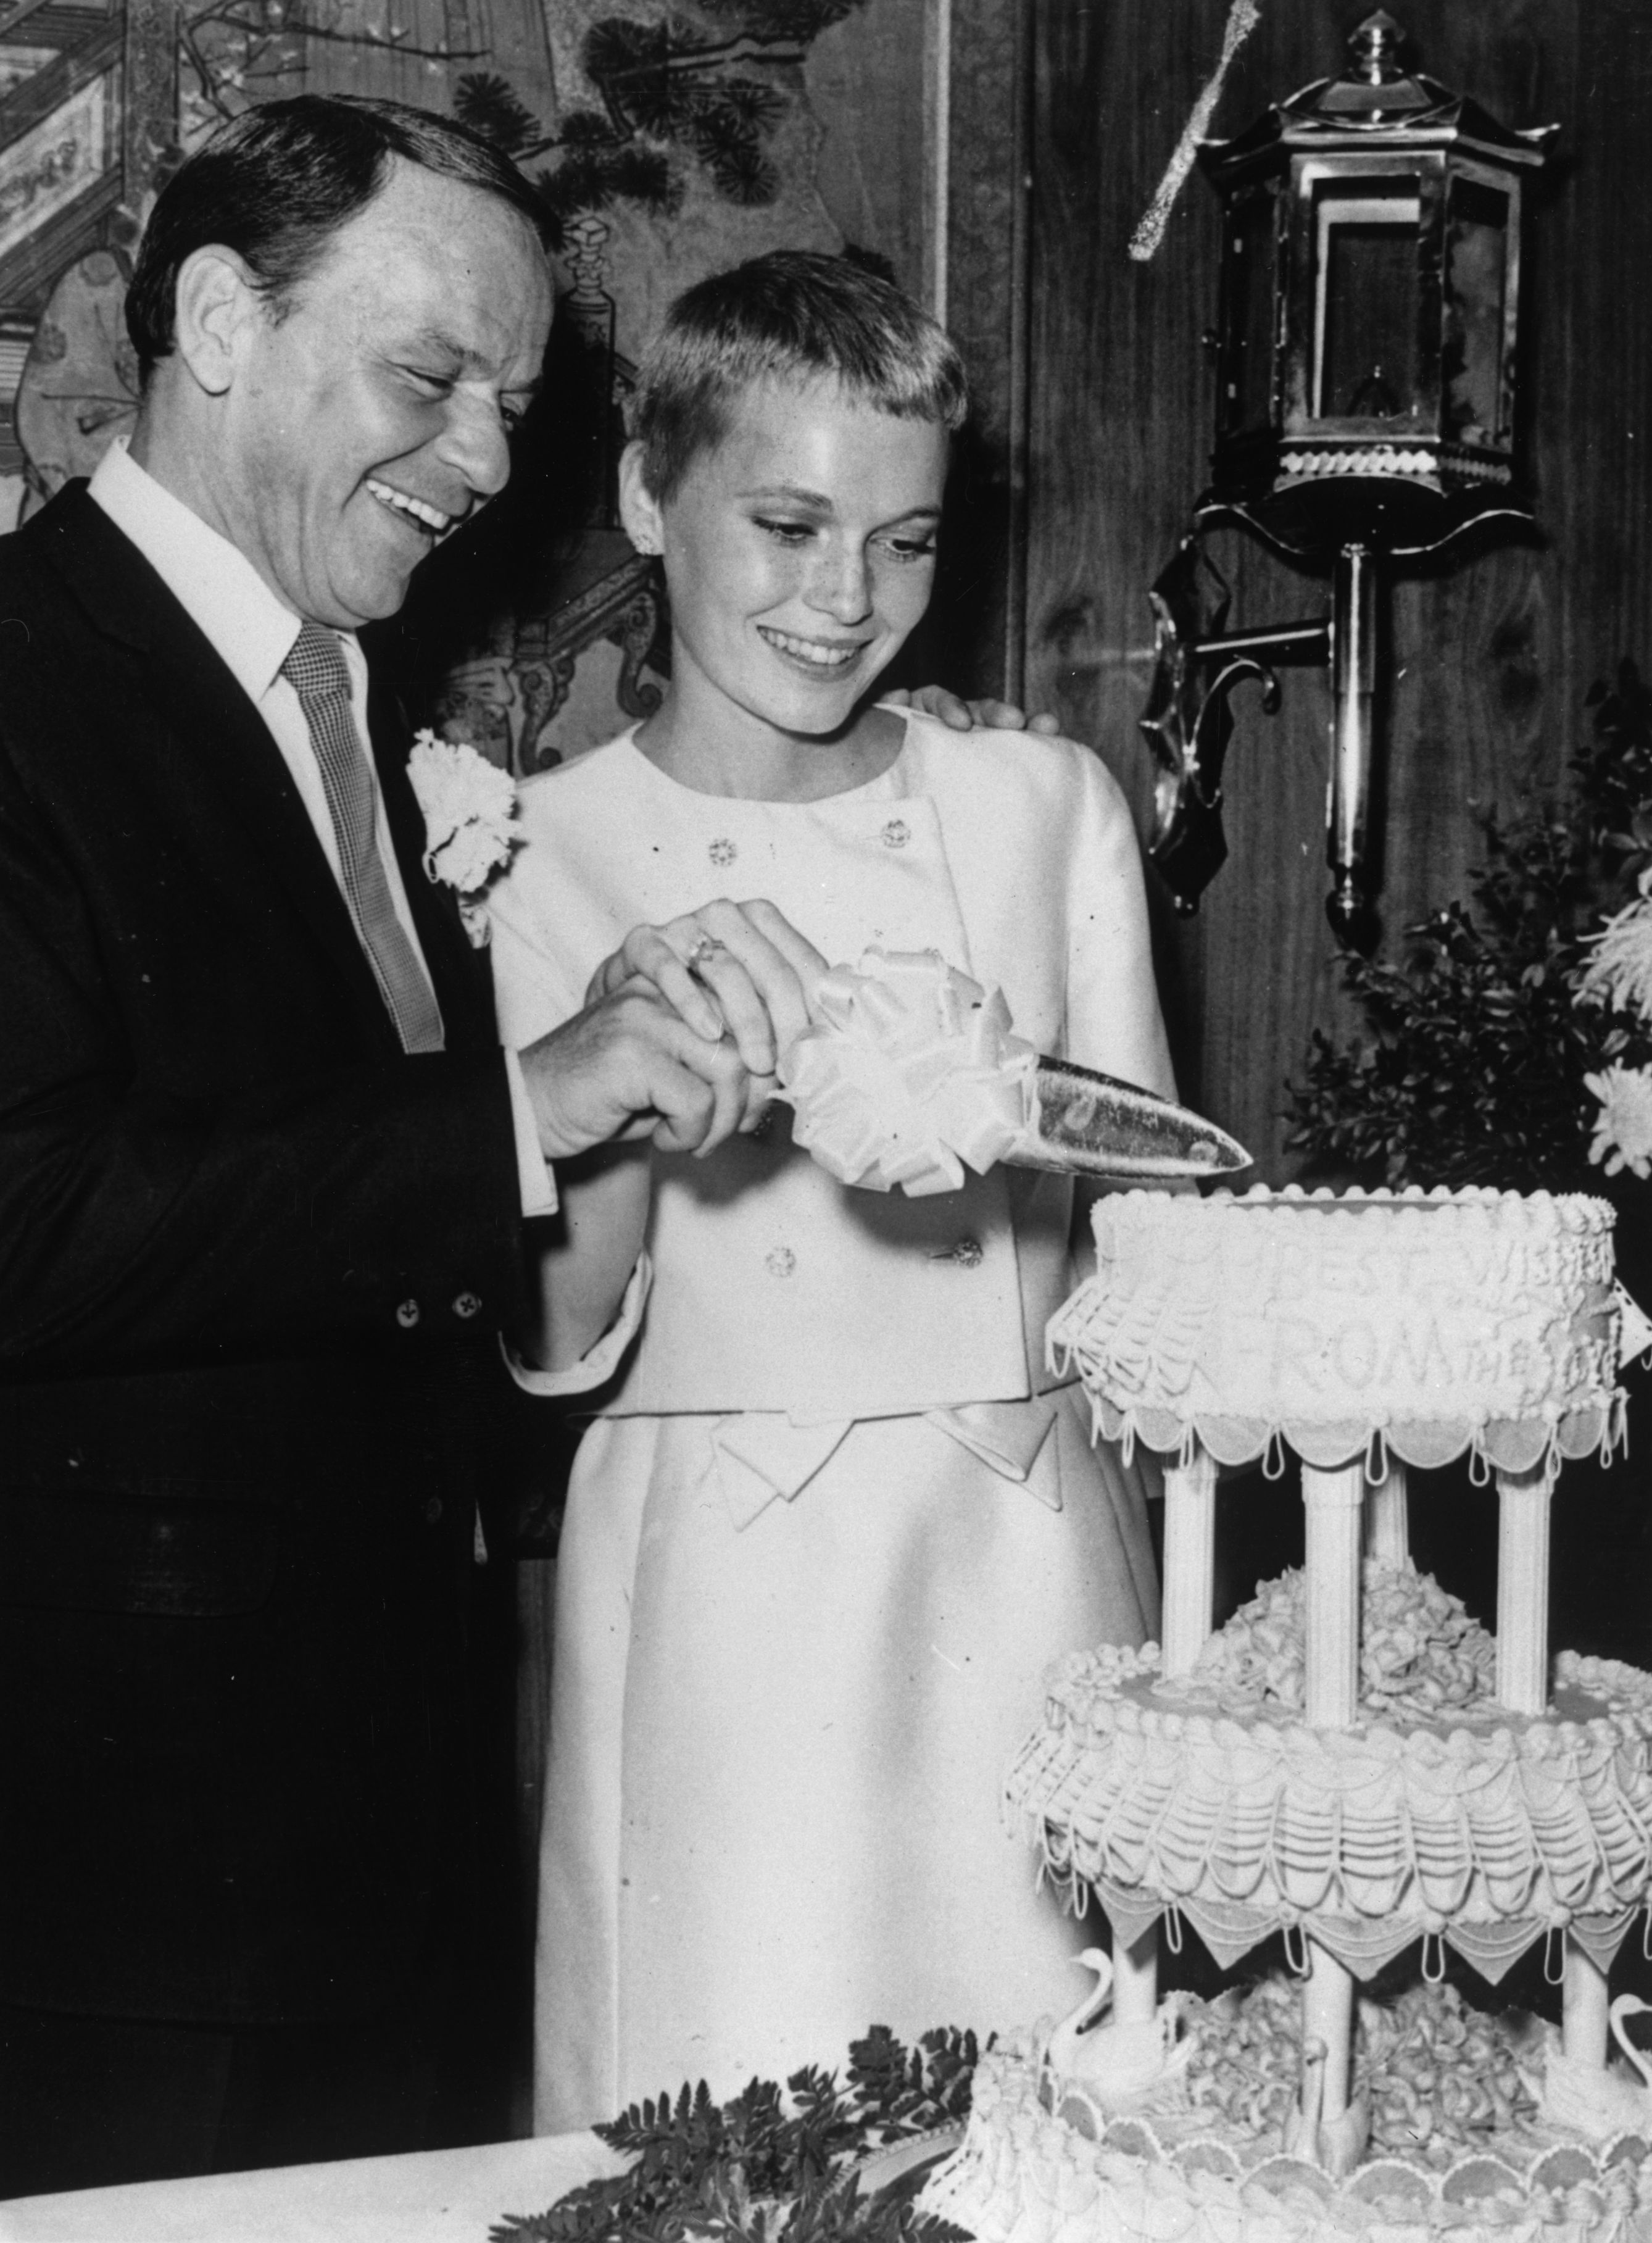 Frank Sinatra and  Mia Farrow cutting their wedding cake on July 19, 1966 in Las Vegas | Source: Getty Images